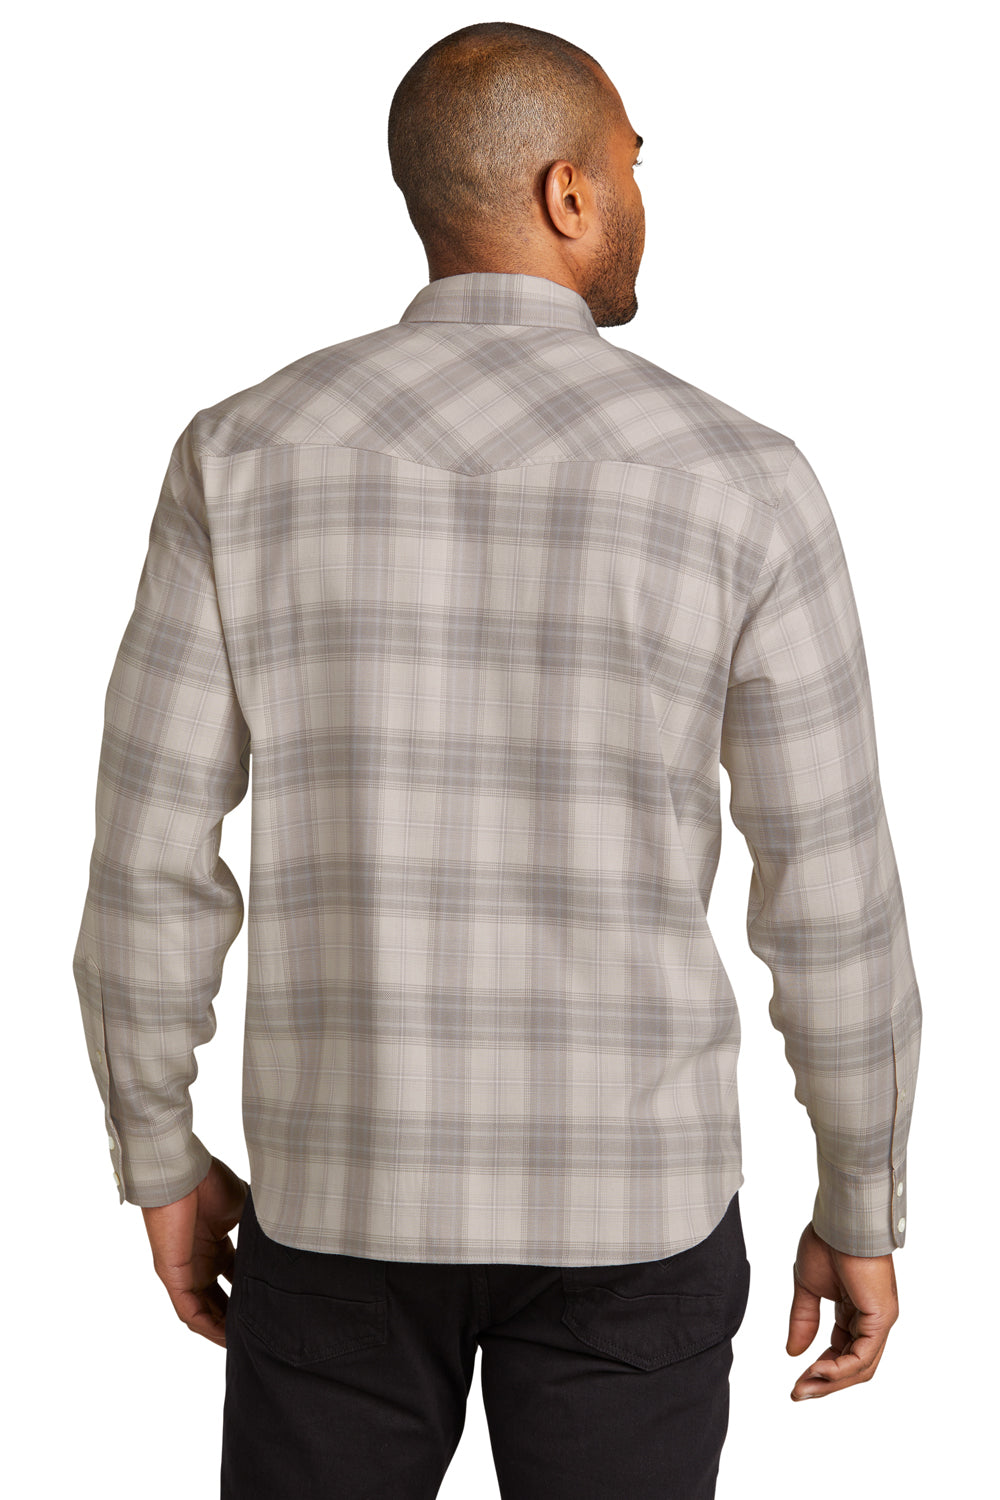 Port Authority W672 Ombre Plaid Long Sleeve Button Down Shirt Frost Grey Back